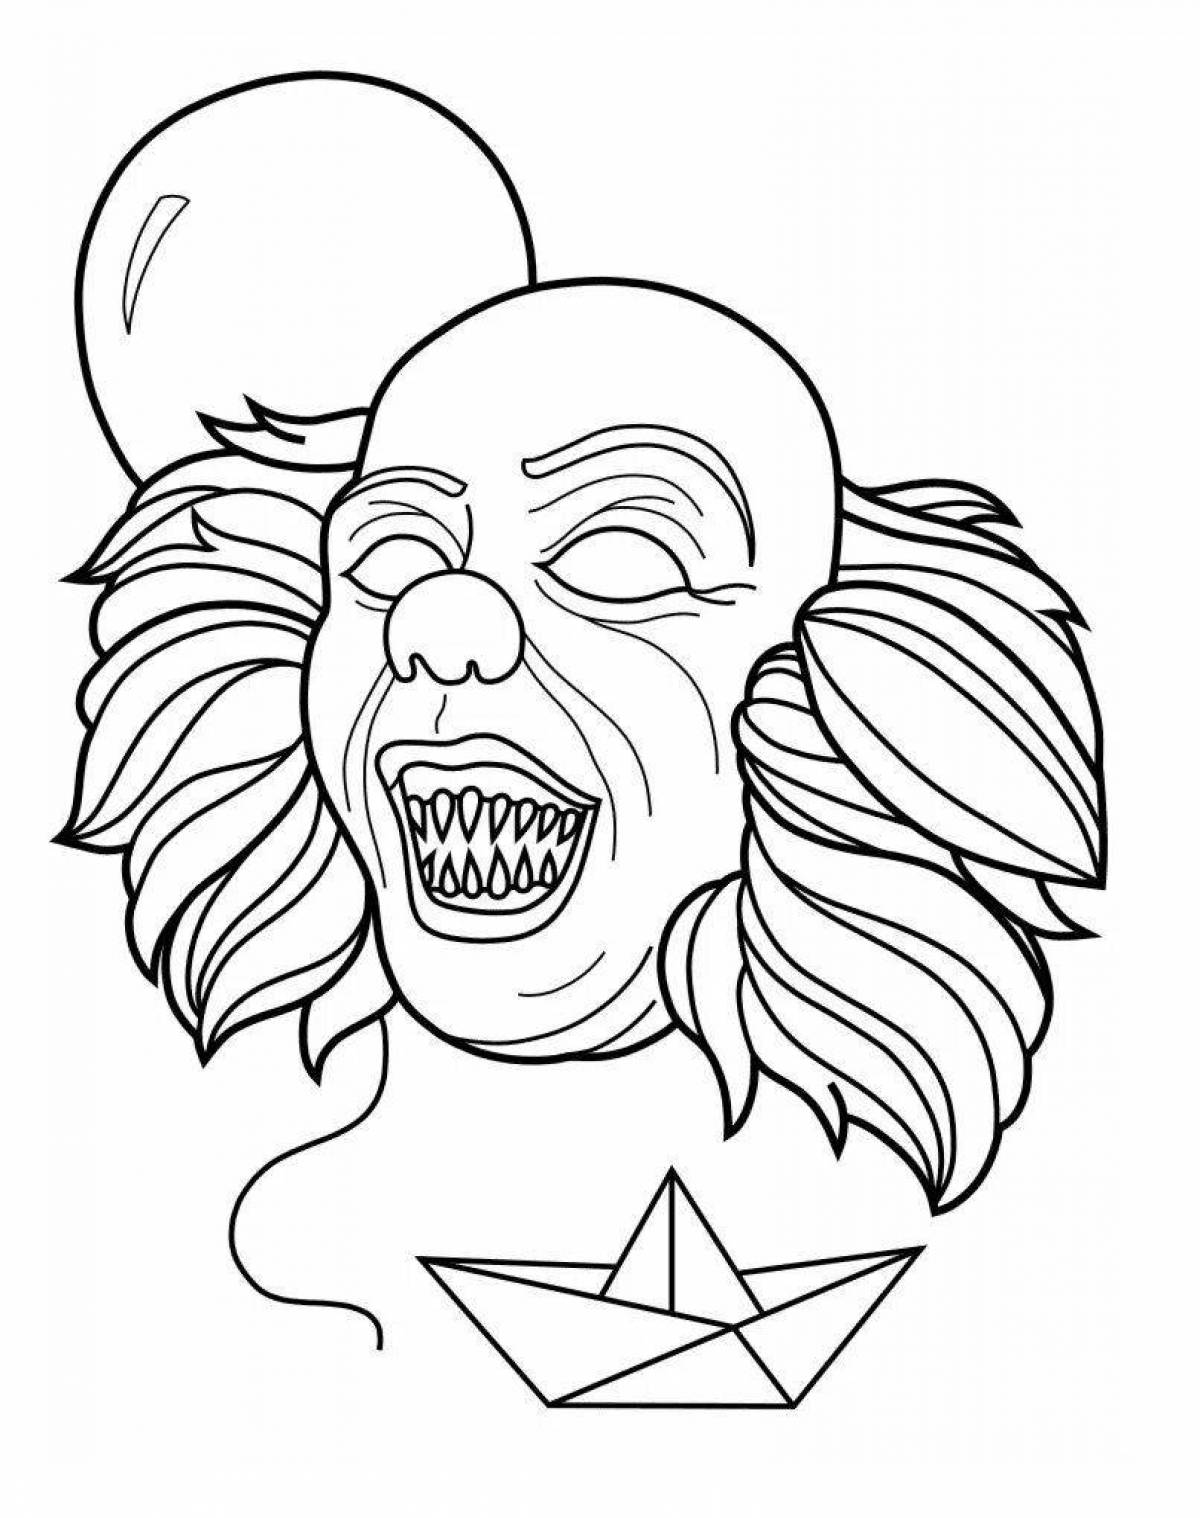 Pennywise's terrible coloring book